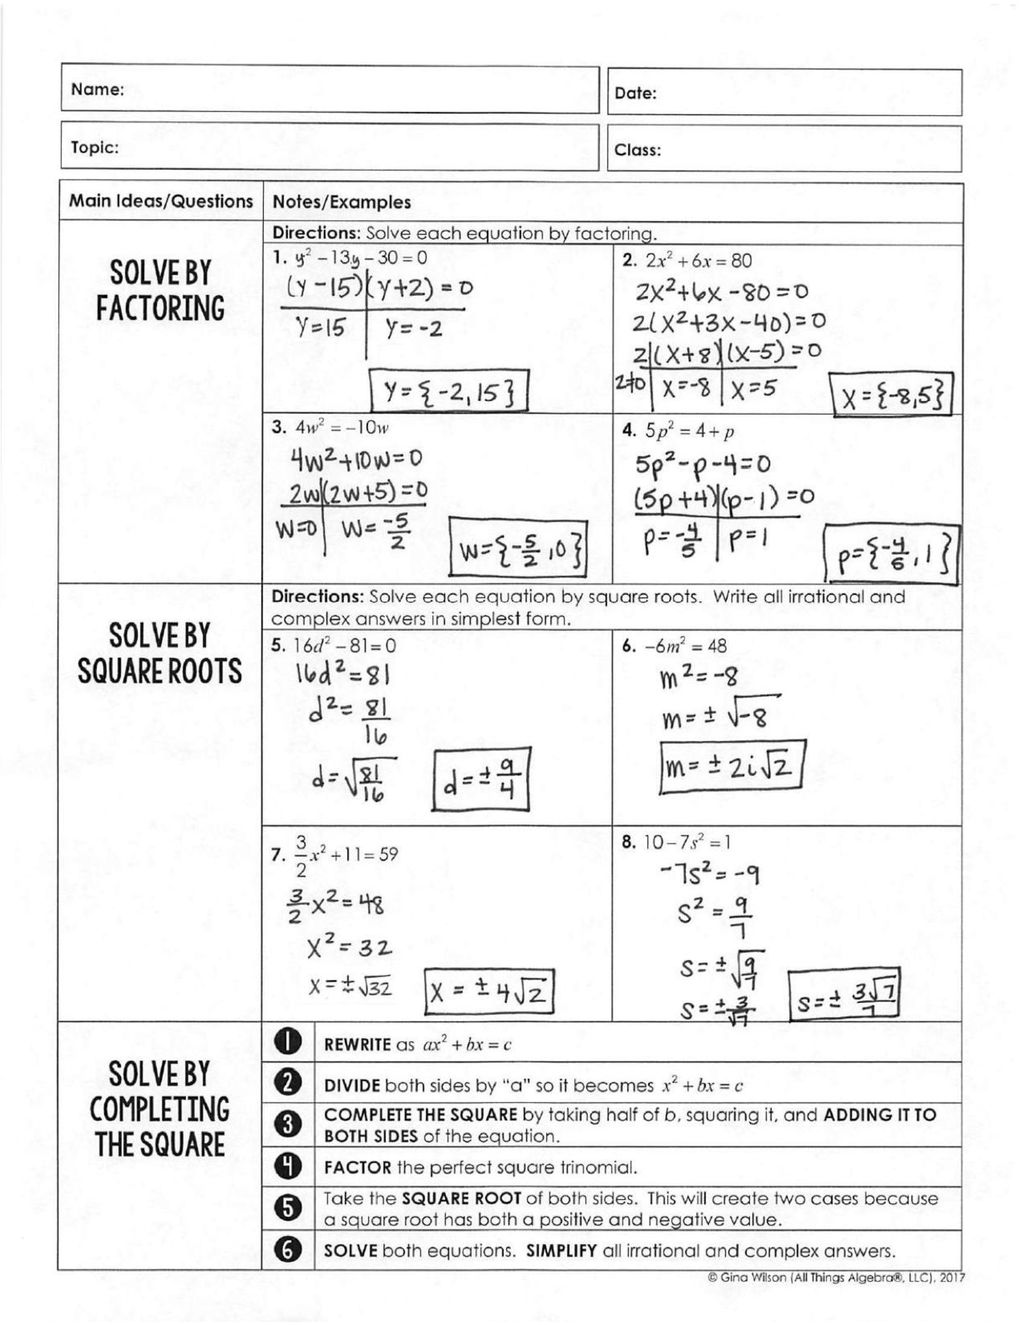 Review last weeks worksheets - ppt download With Solving Equations By Factoring Worksheet